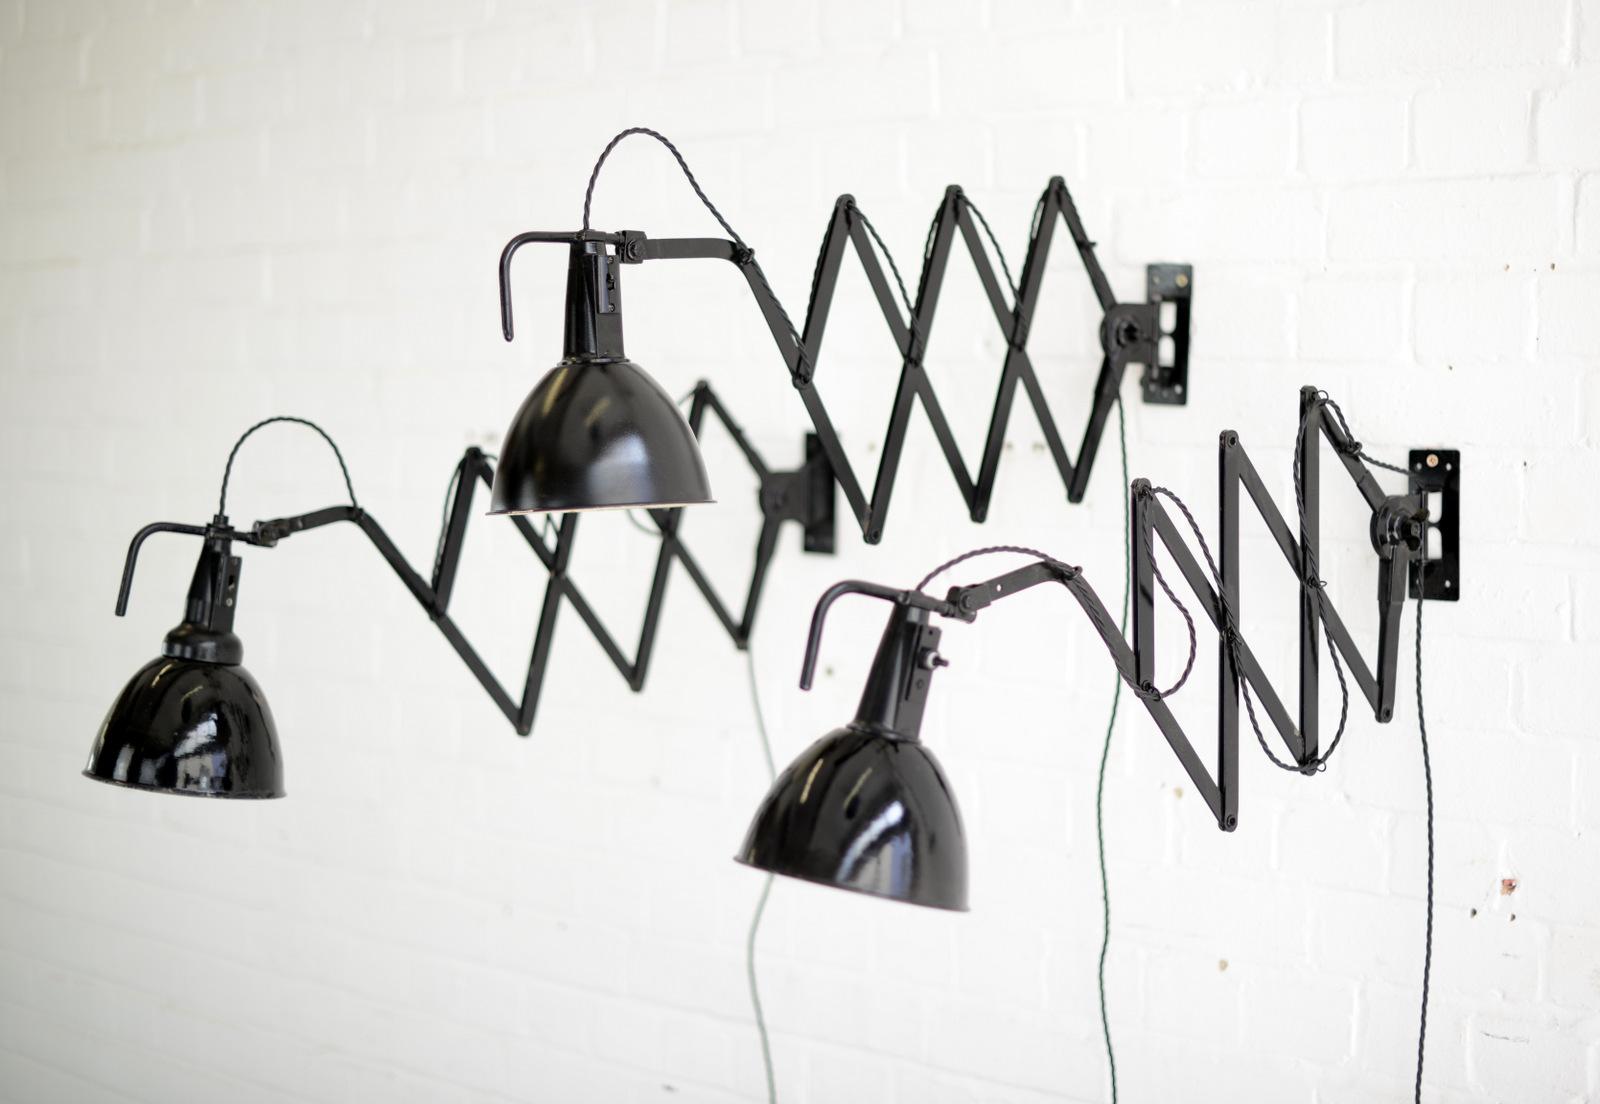 Modernist scissor lamps by Wilhelm Bader, circa 1930s

- Price is per light
- Large extendable scissor mechanism 
- Original On/Off switches 
- Takes E27 fitting bulbs
- German ~ 1930s
- Extends up to 115cm from the wall
- 18cm wide x 25cm